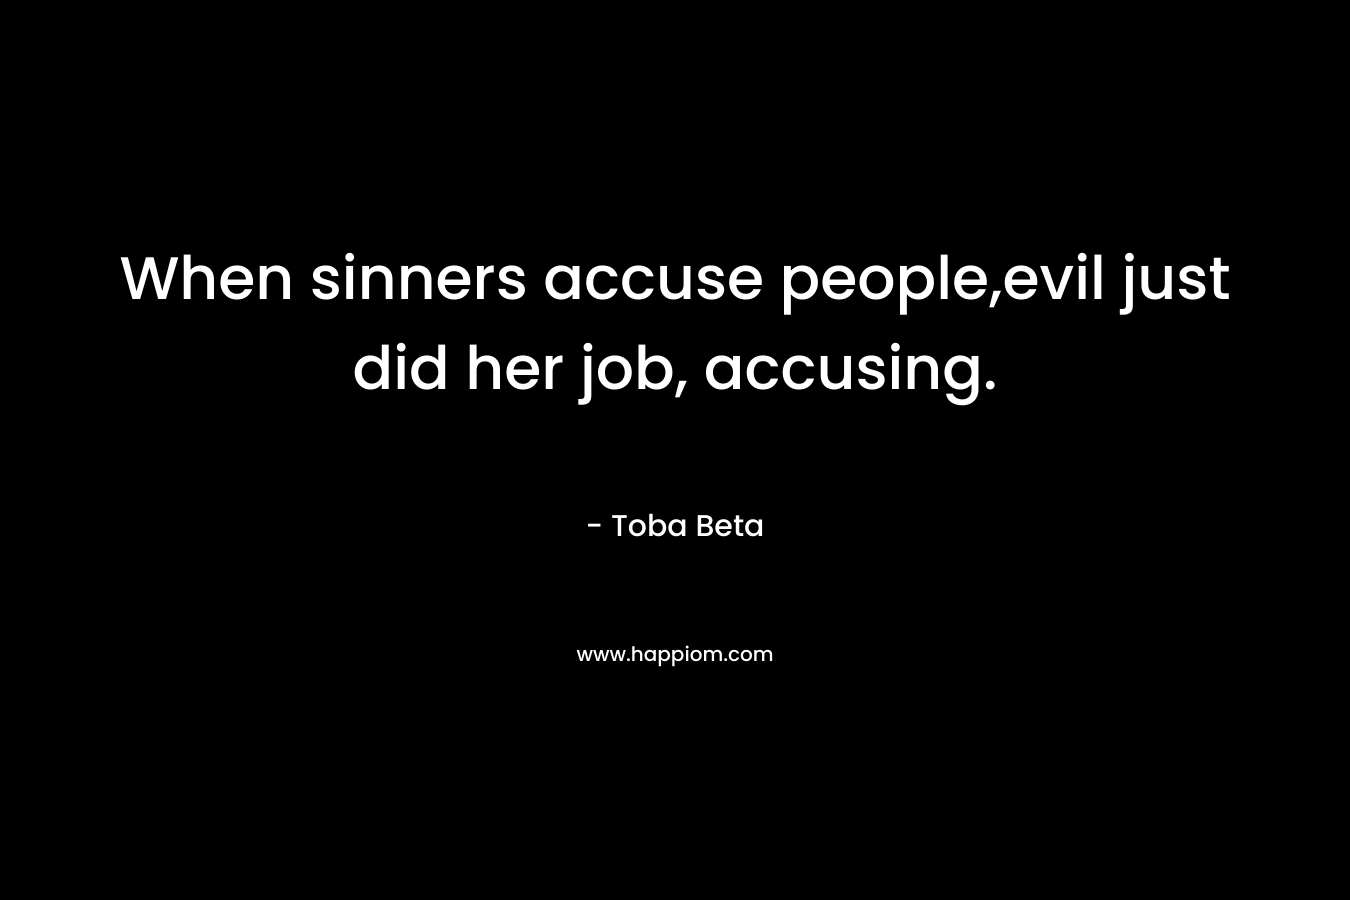 When sinners accuse people,evil just did her job, accusing.